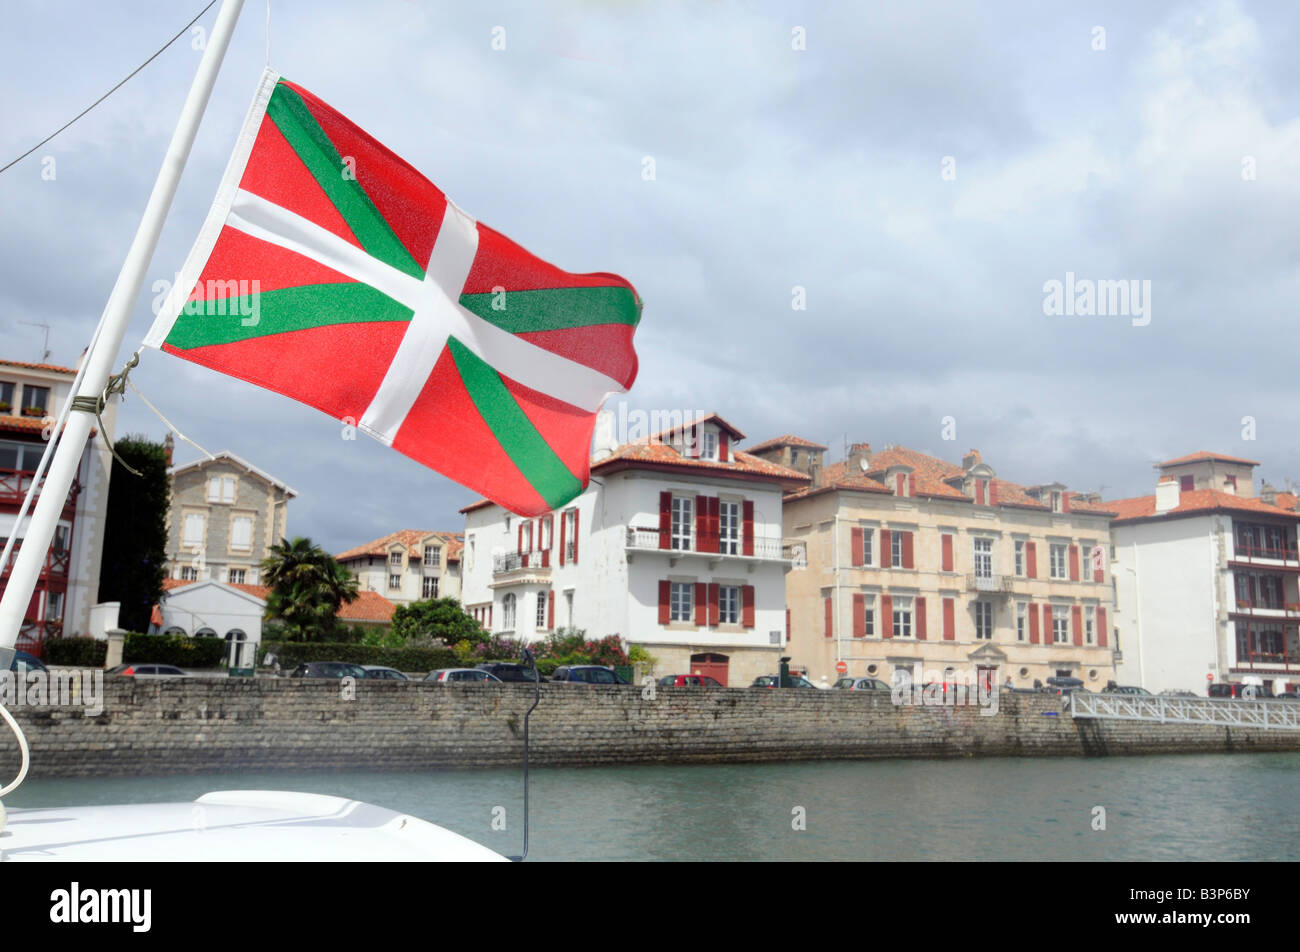 A Basque flag flying from a boat's mast in the harbour of St Jean de Luz, a small town in the Pays Basque, South-West France Stock Photo